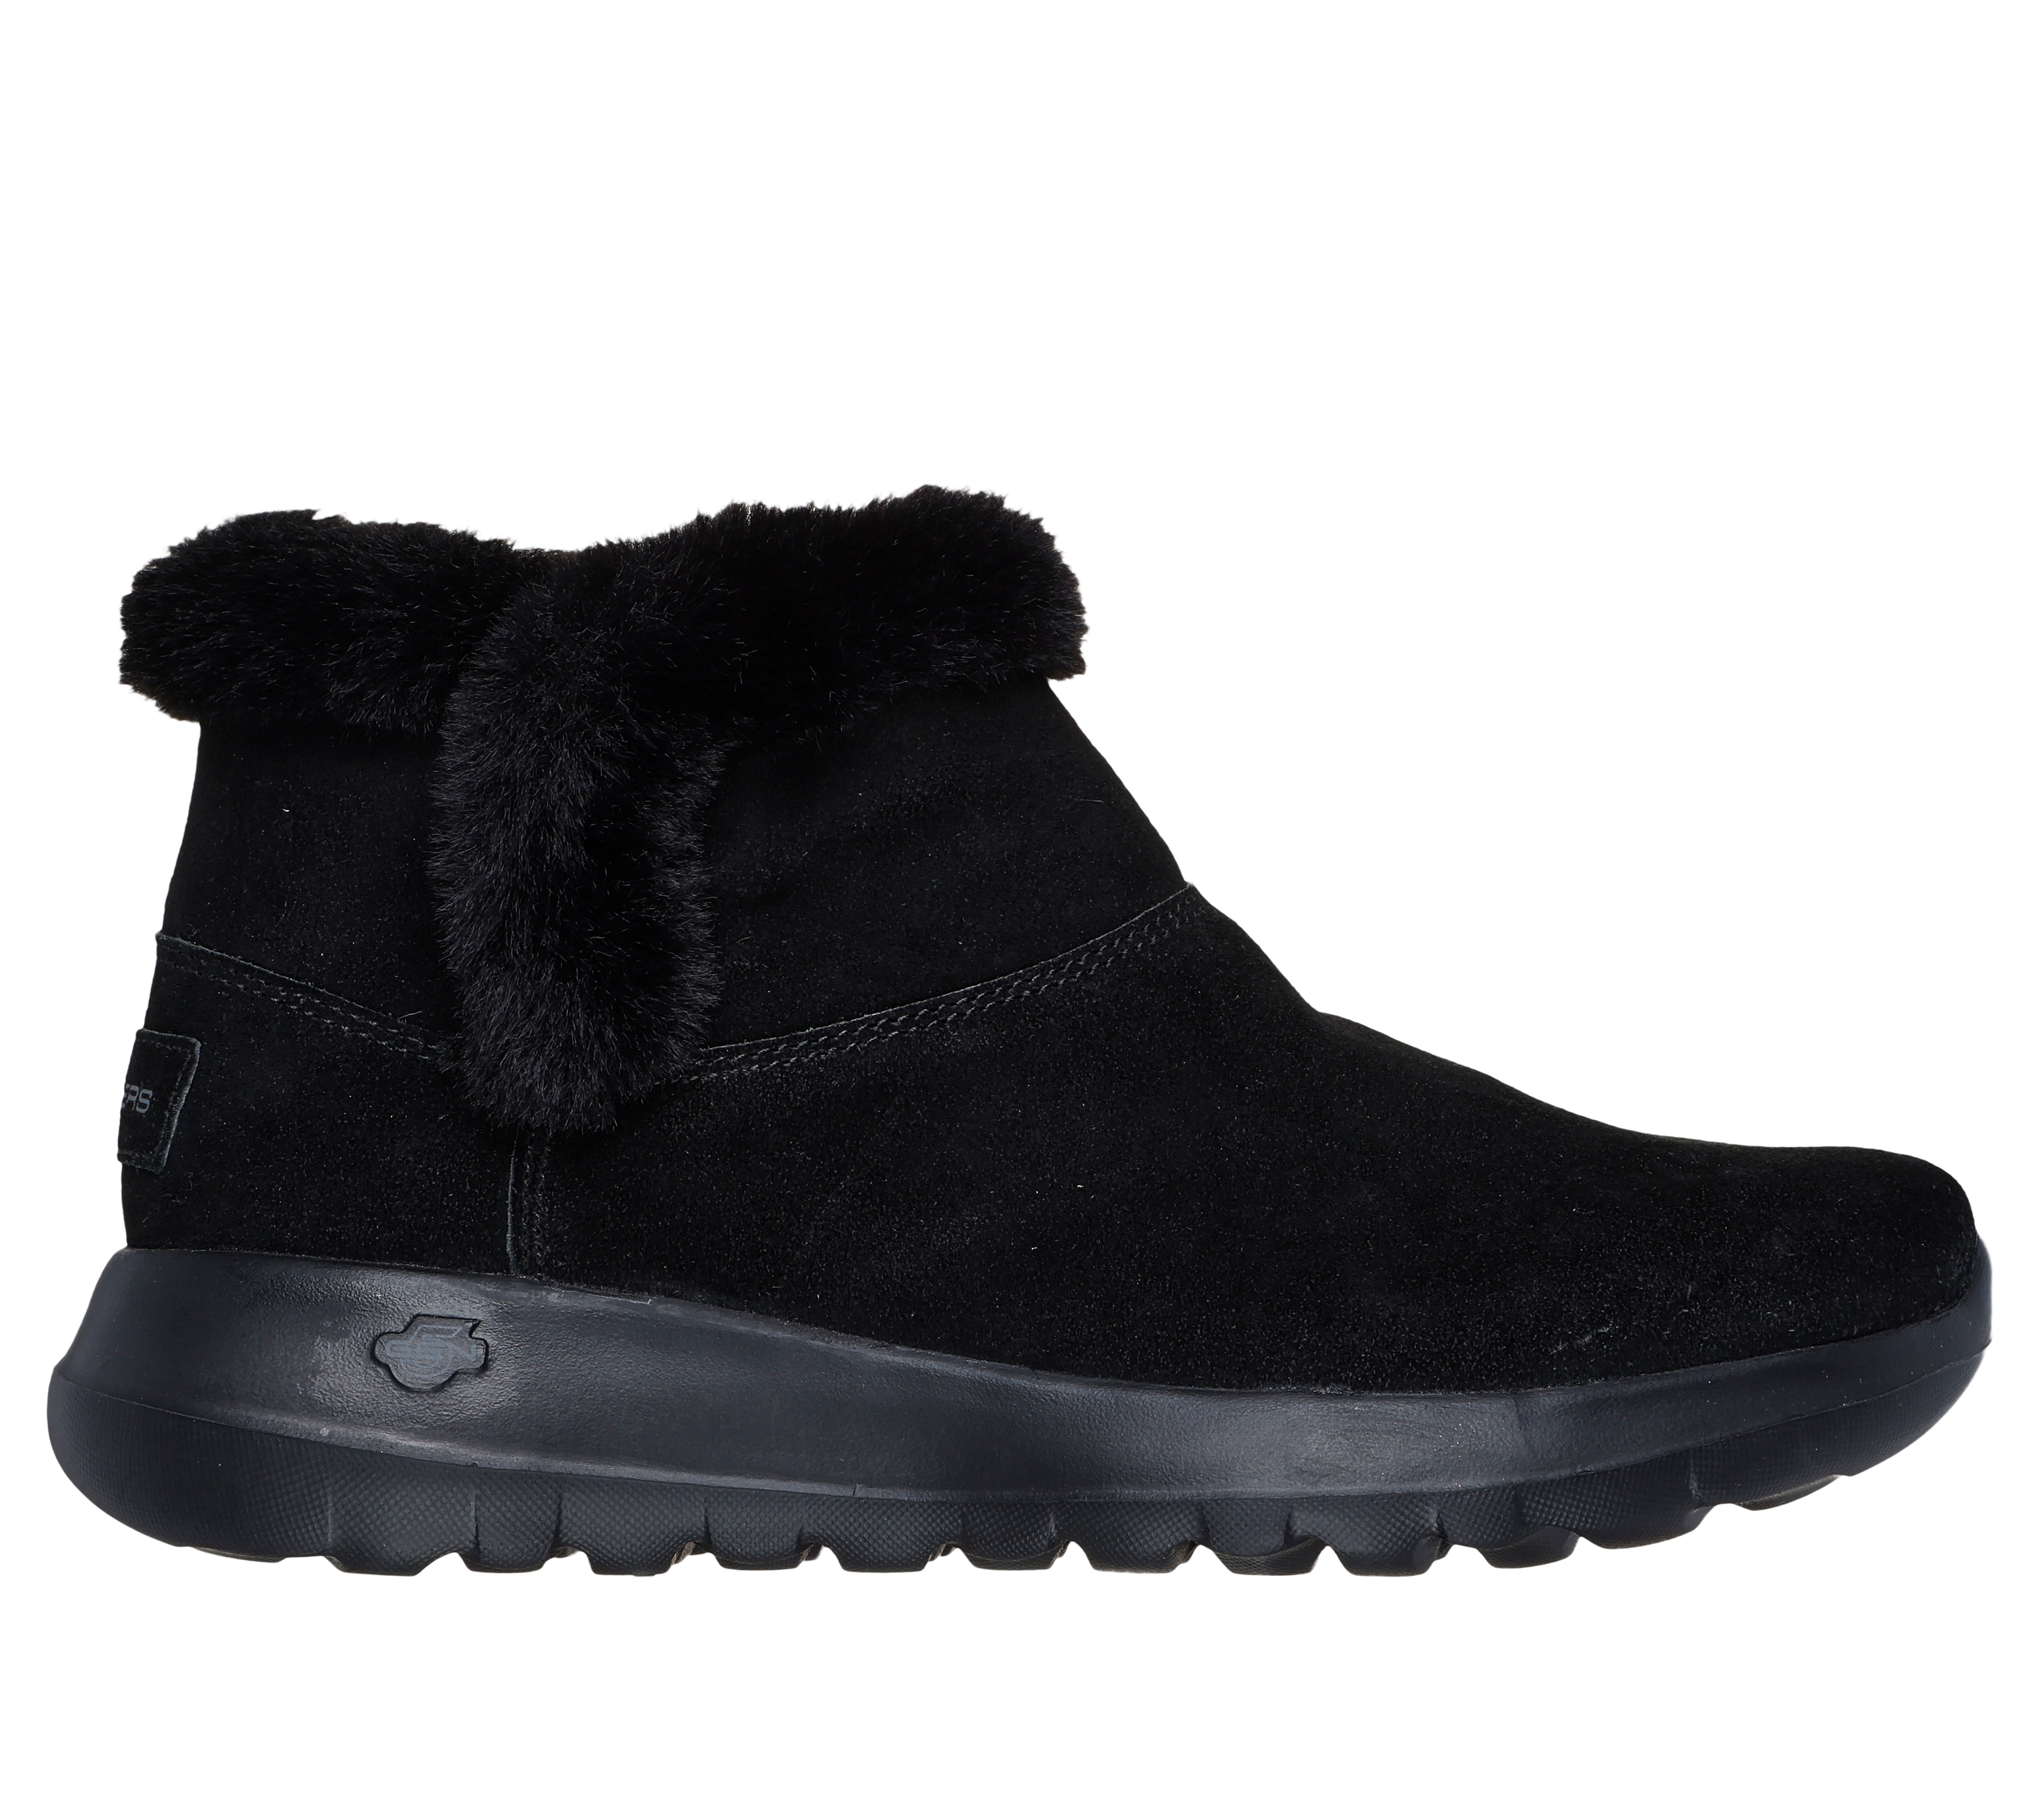 skechers on the go casual chukka boot